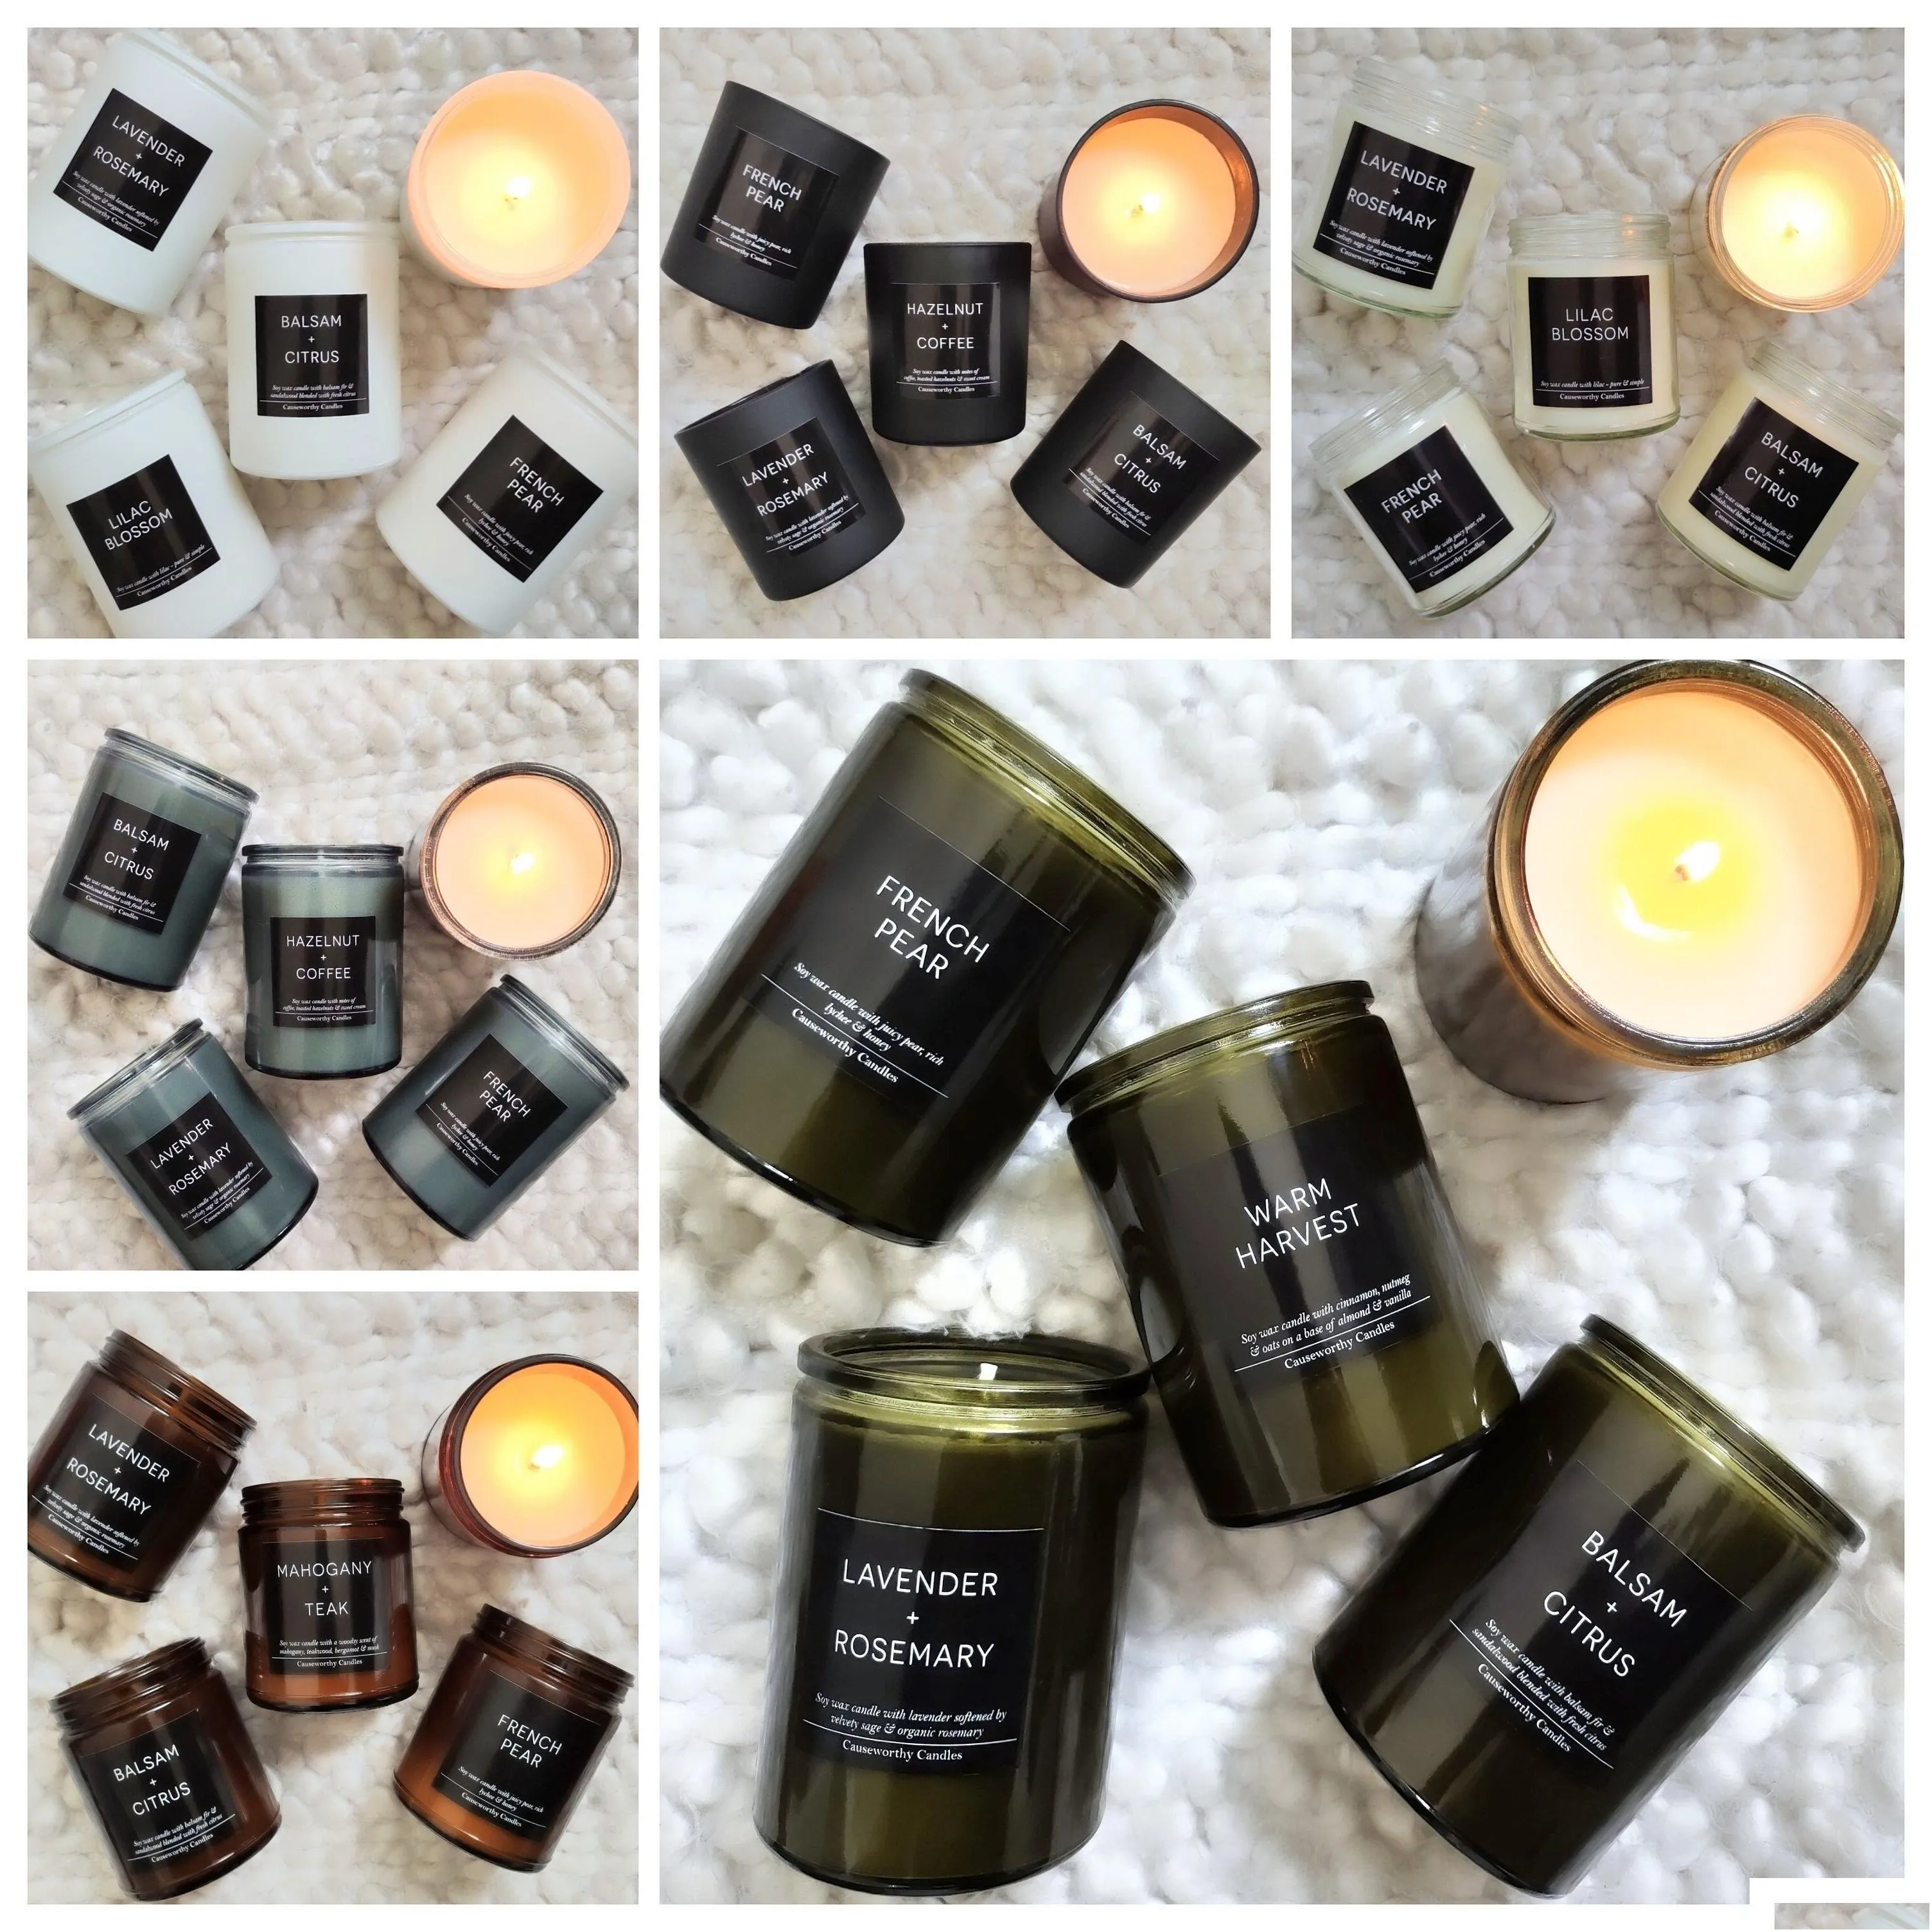 high quality - clean burning - handcrafted - non-toxic - glass jars - causeworthy candles